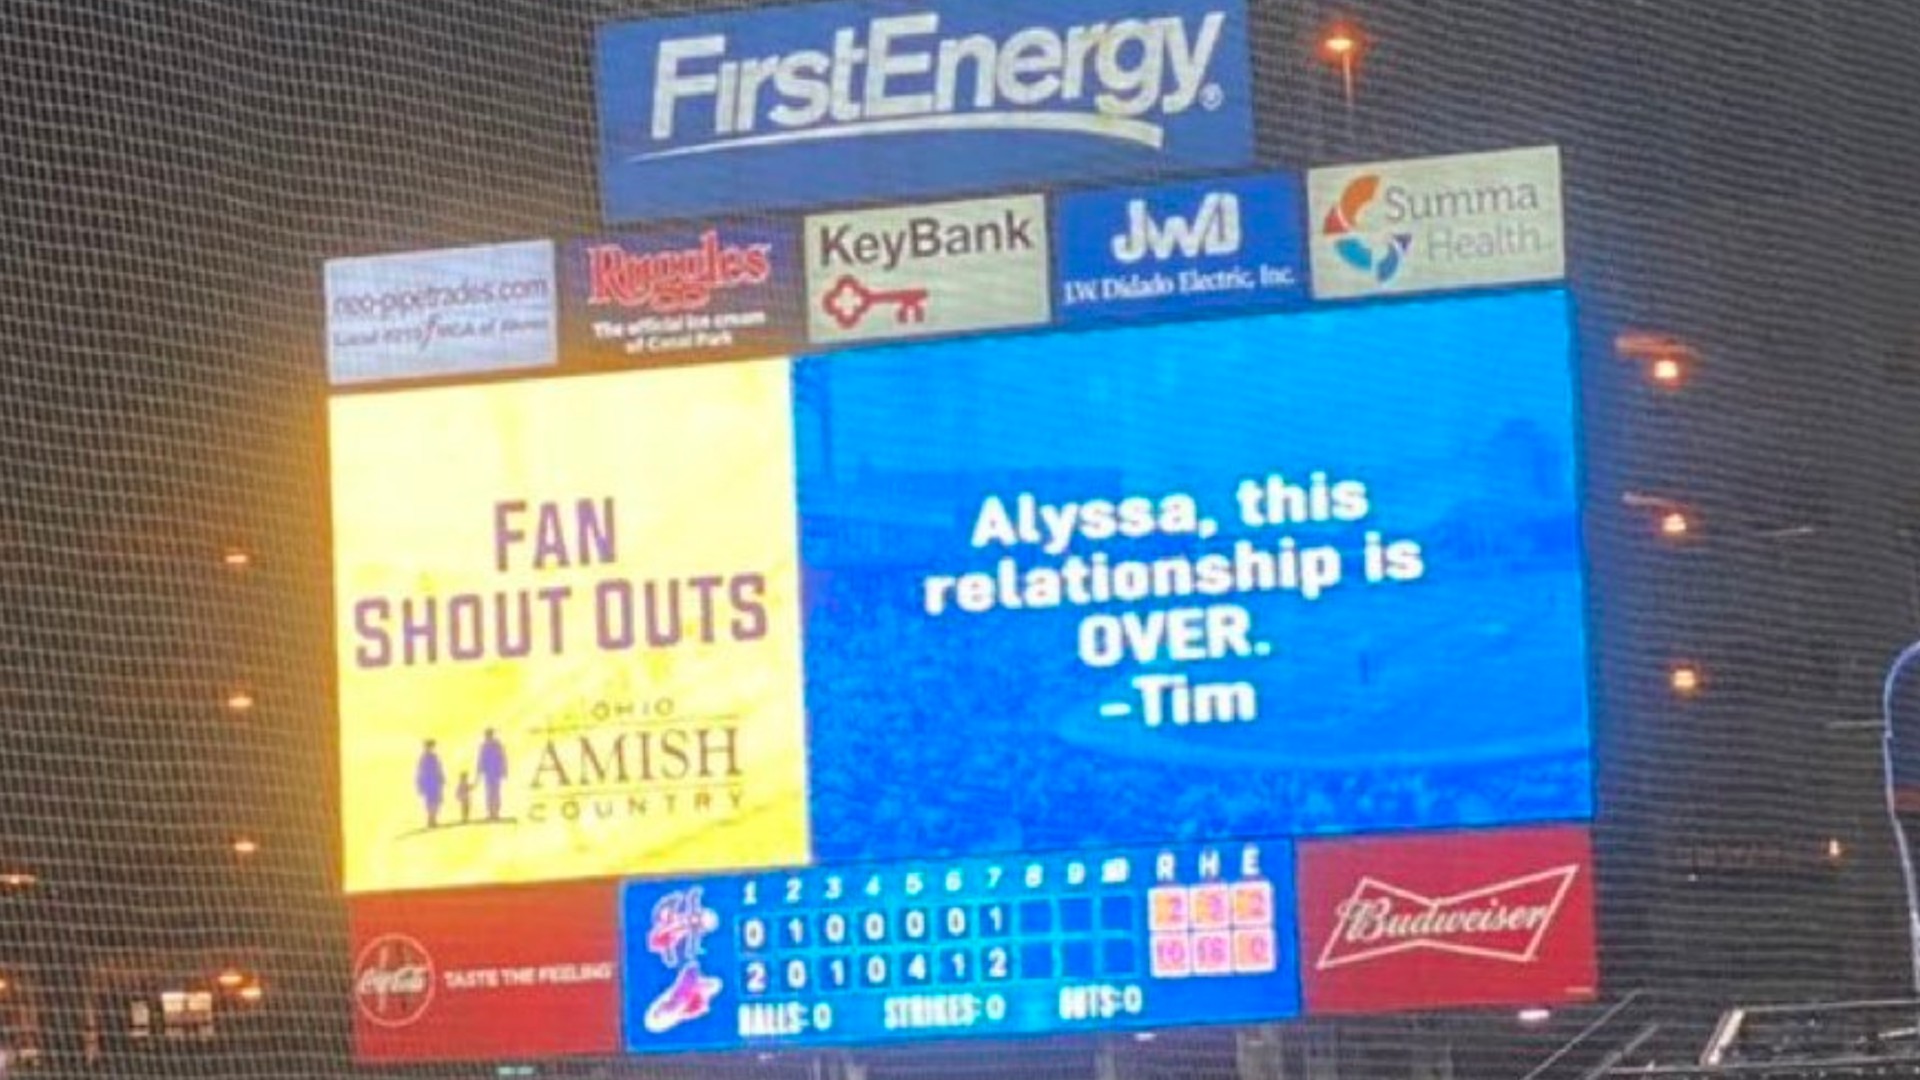 Man breaks up with female friend by assignment of Jumbotron: ‘Alyssa, this relationship is OVER’